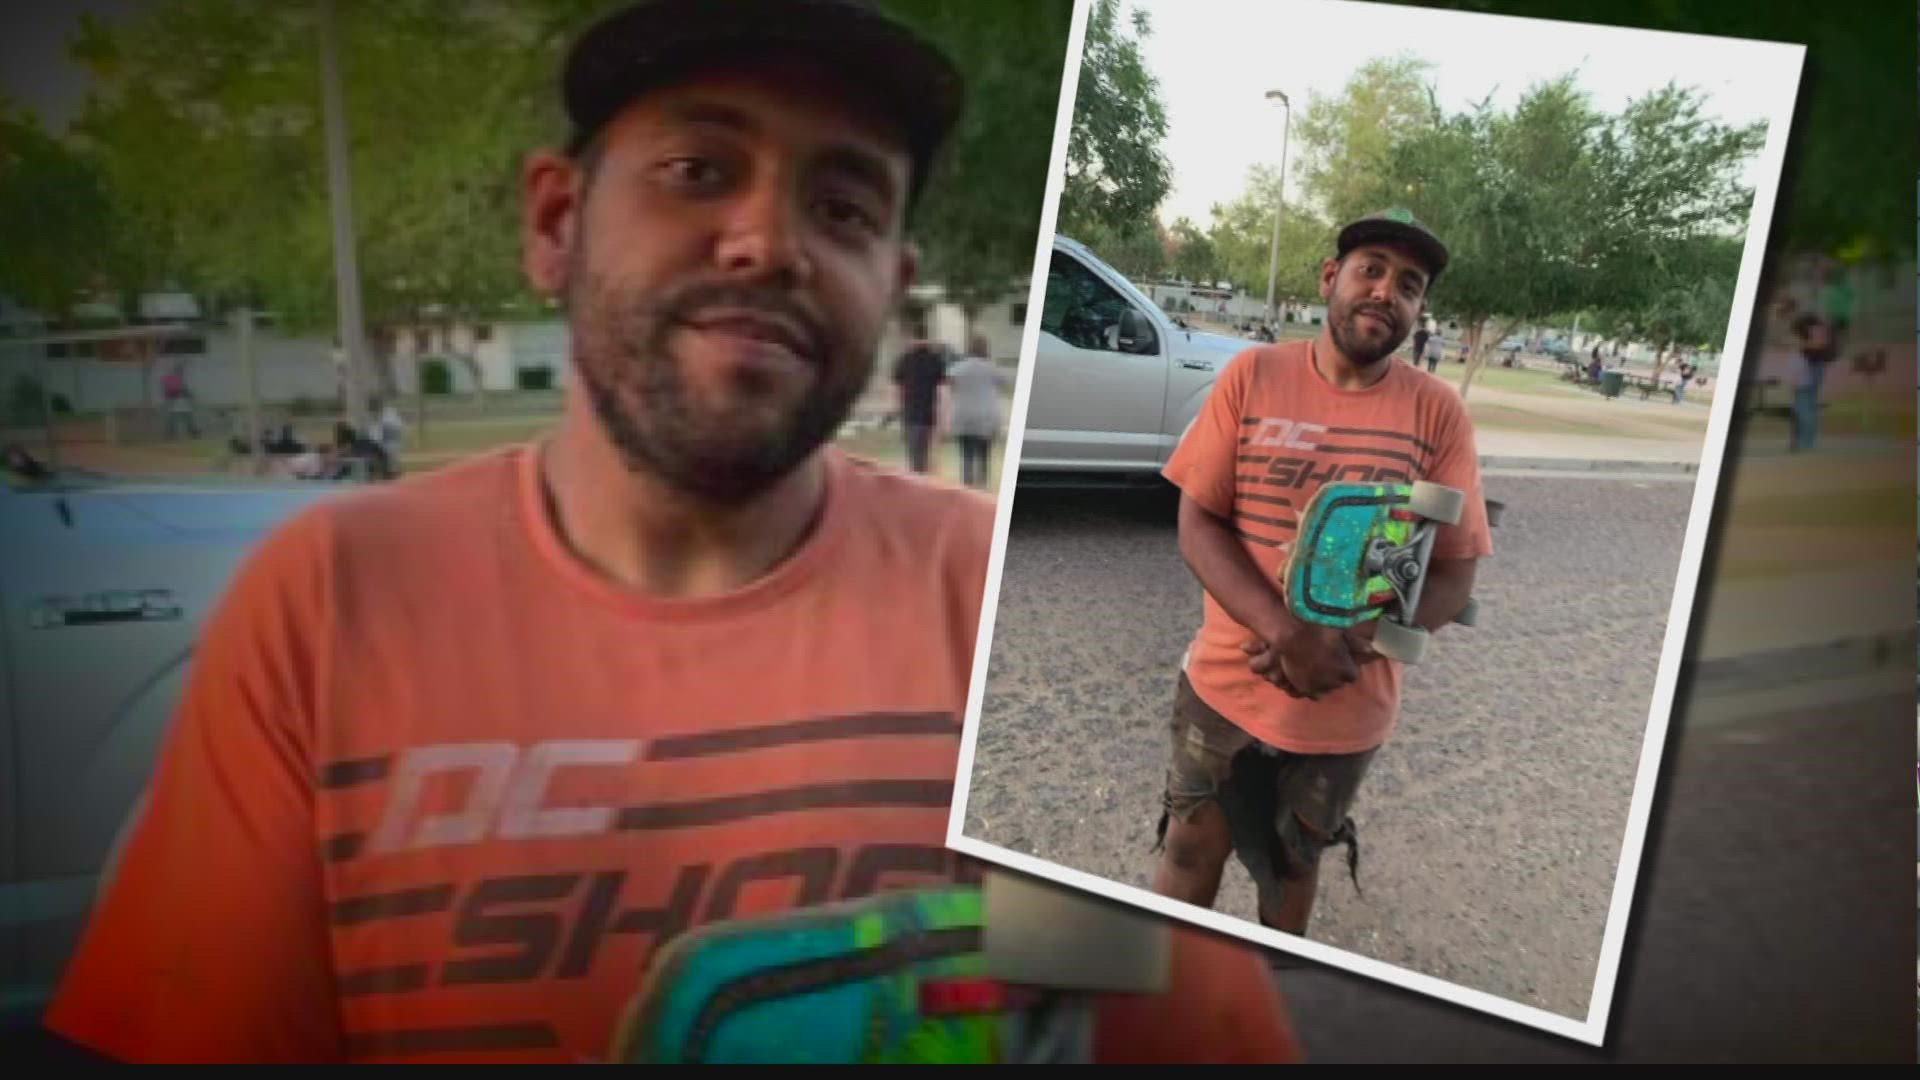 An incident where a homeless man drowned in Tempe Town lake has put the department’s protocols in the spotlight.